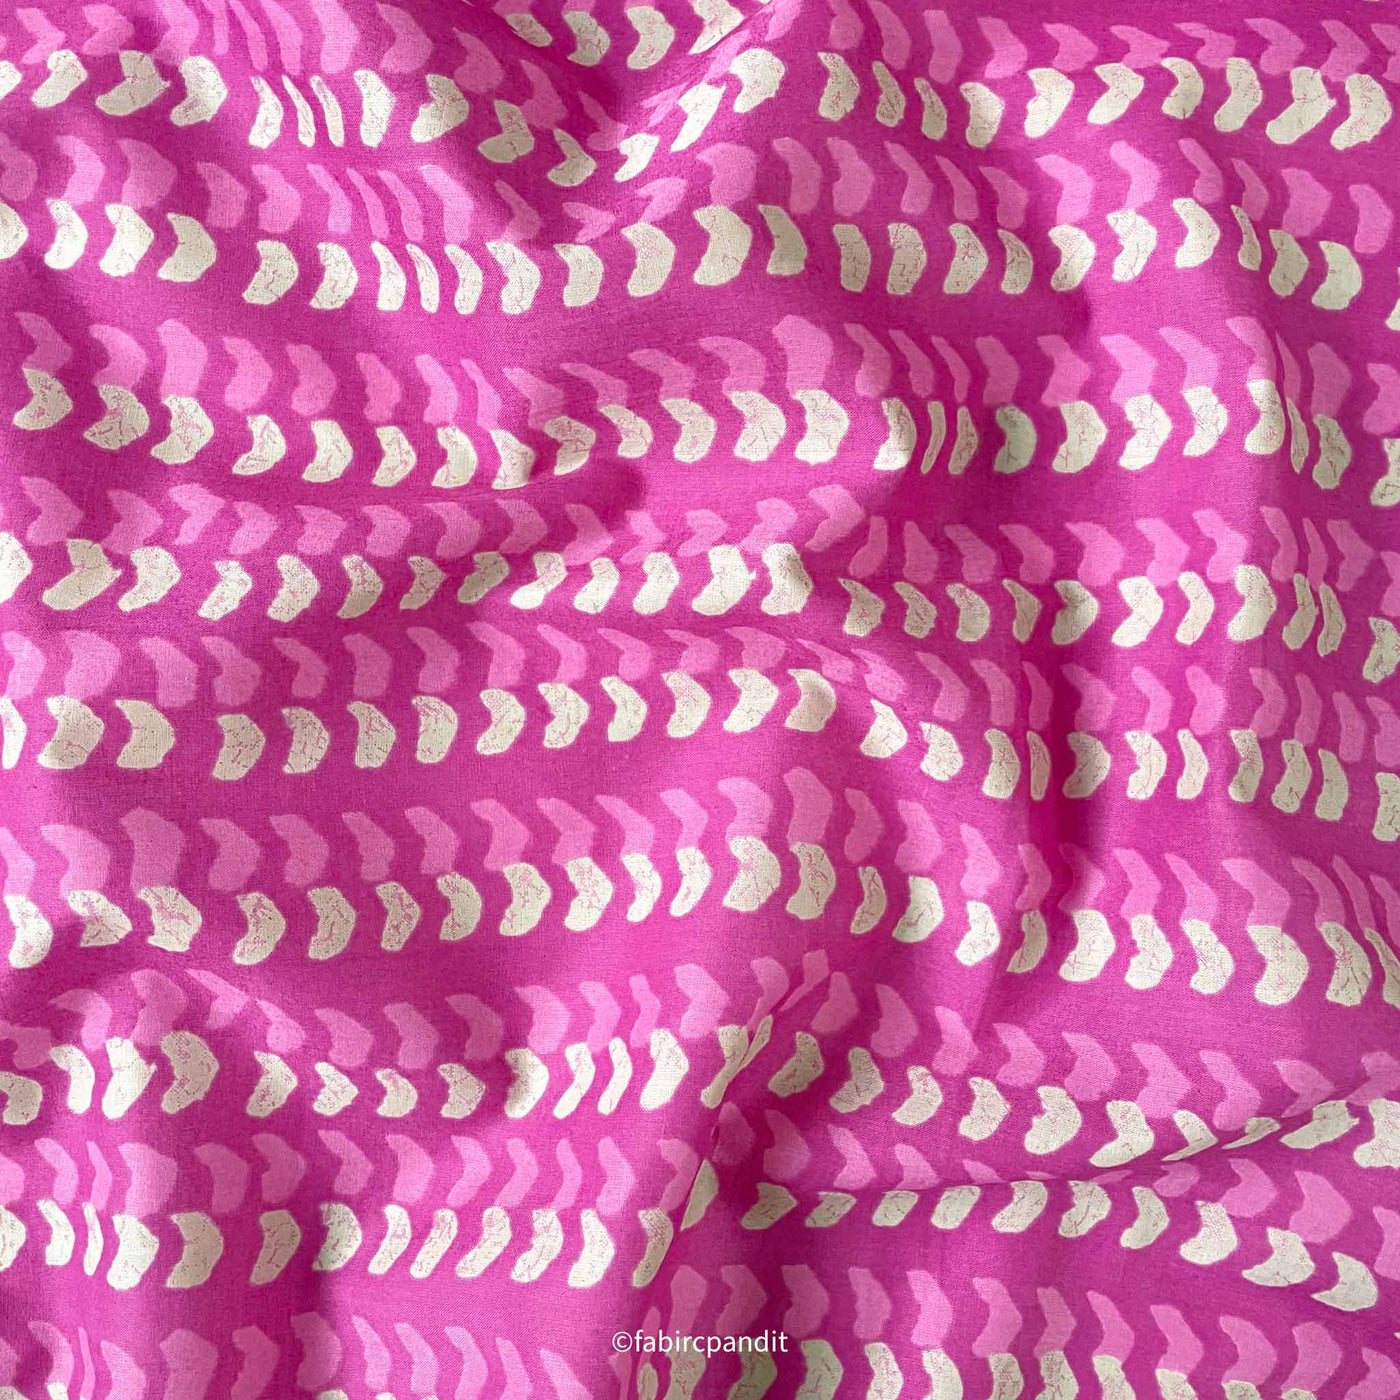 Fabric Pandit Fabric Pink and Grey Geometric Stripes Hand Block Printed Pure Cotton Fabric (Width 43 inches)